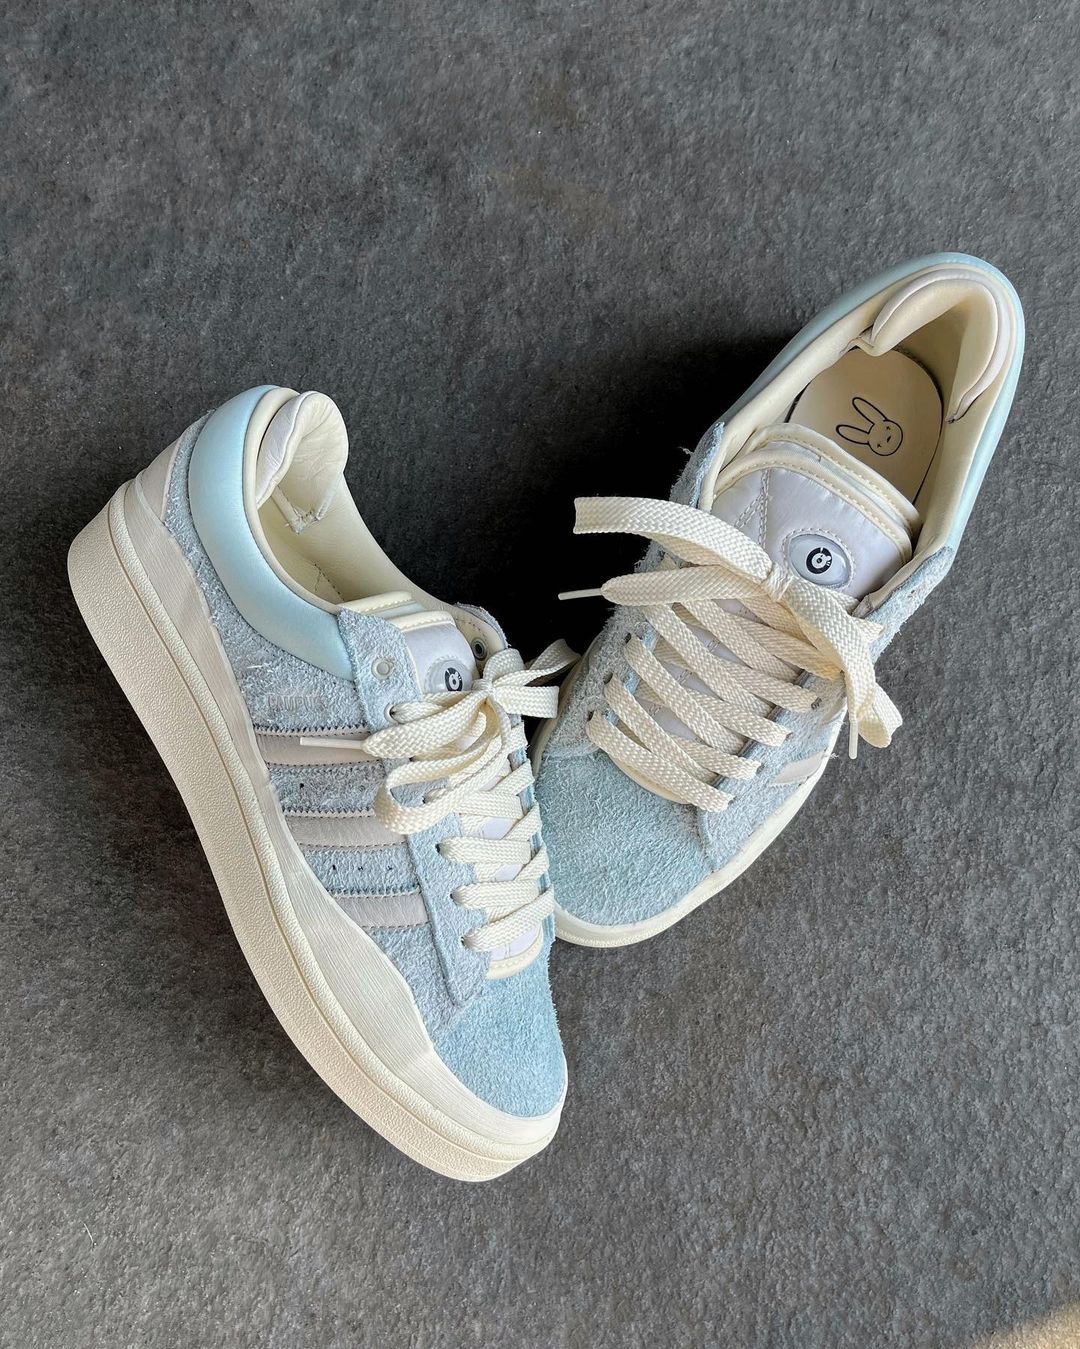 WHY ARE THESE STILL SITTING???? ADIDAS CAMPUS BAD BUNNY REVIEW - YouTube